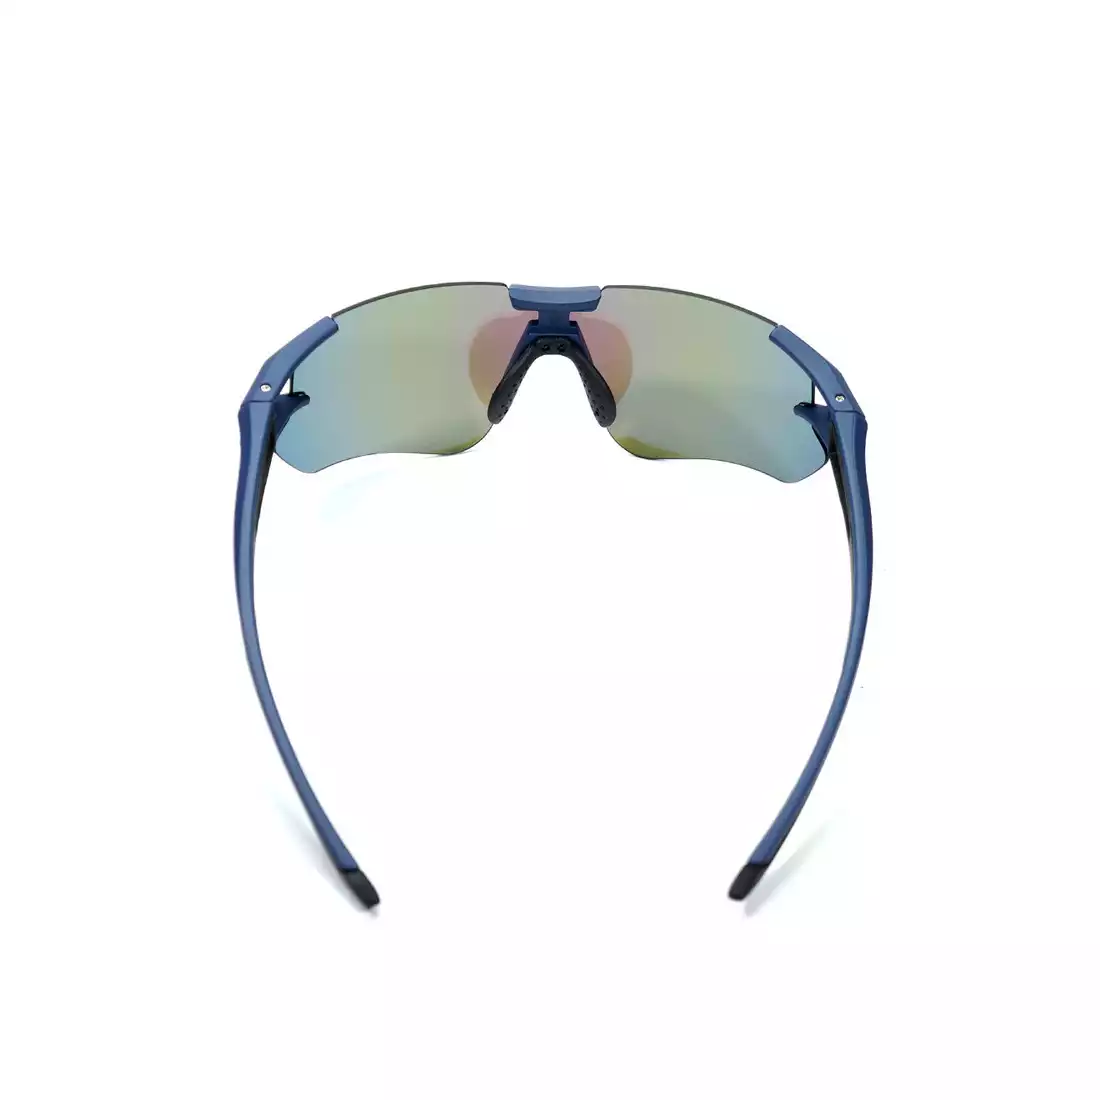 ROCKBROS Polarized Cycling Outdoor Goggles Sunglasses Sports Glasses Black Blue 